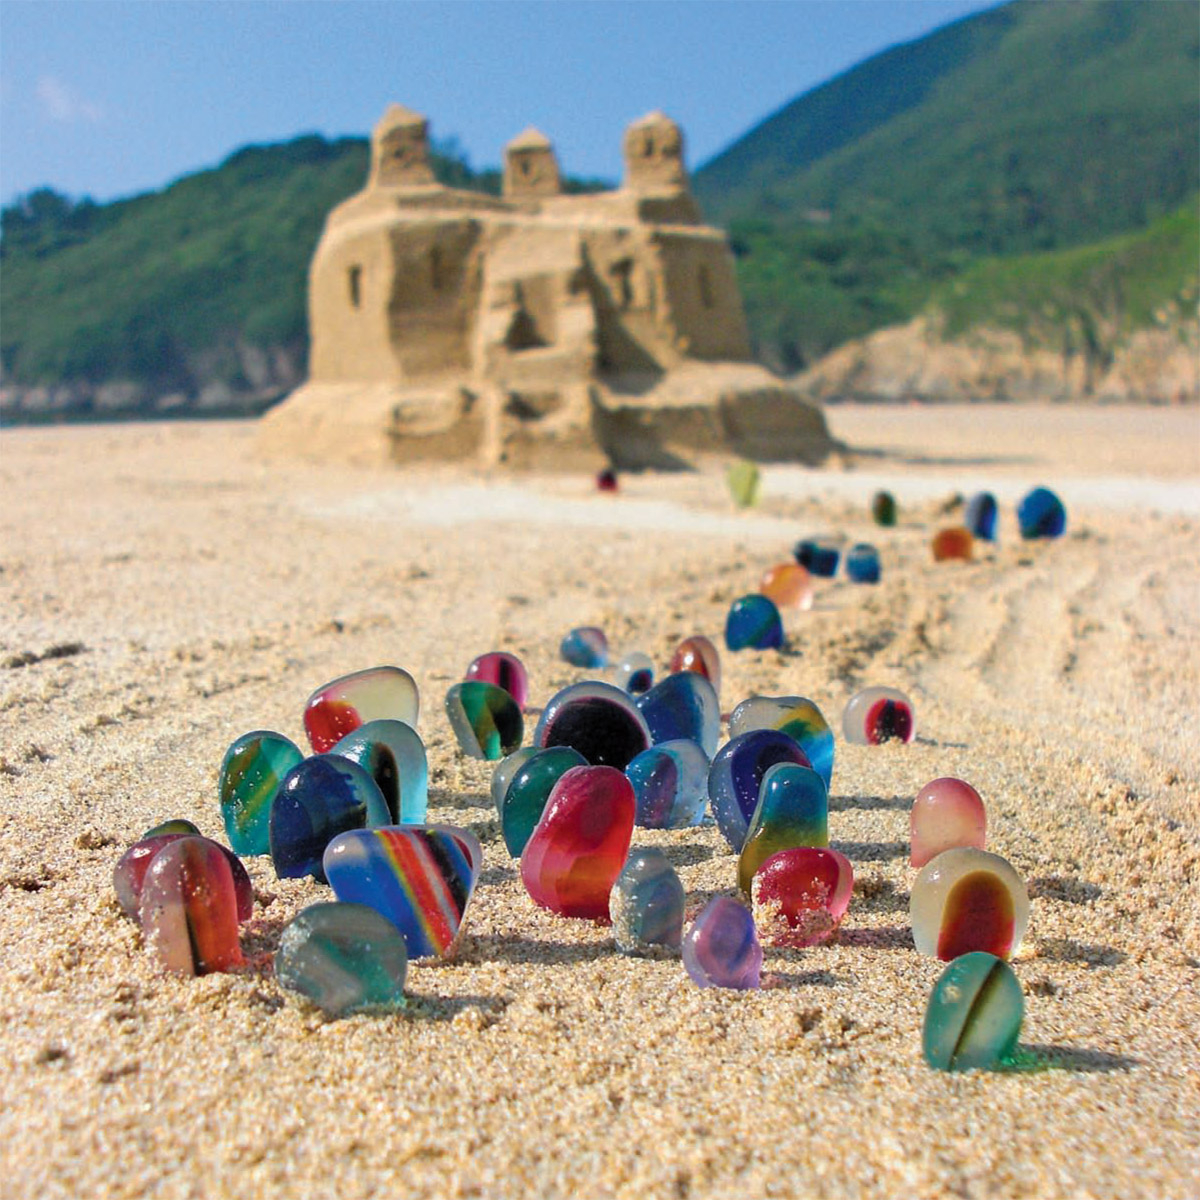 These seaglass multies look like colorfully dressed people here flocking - photo 10